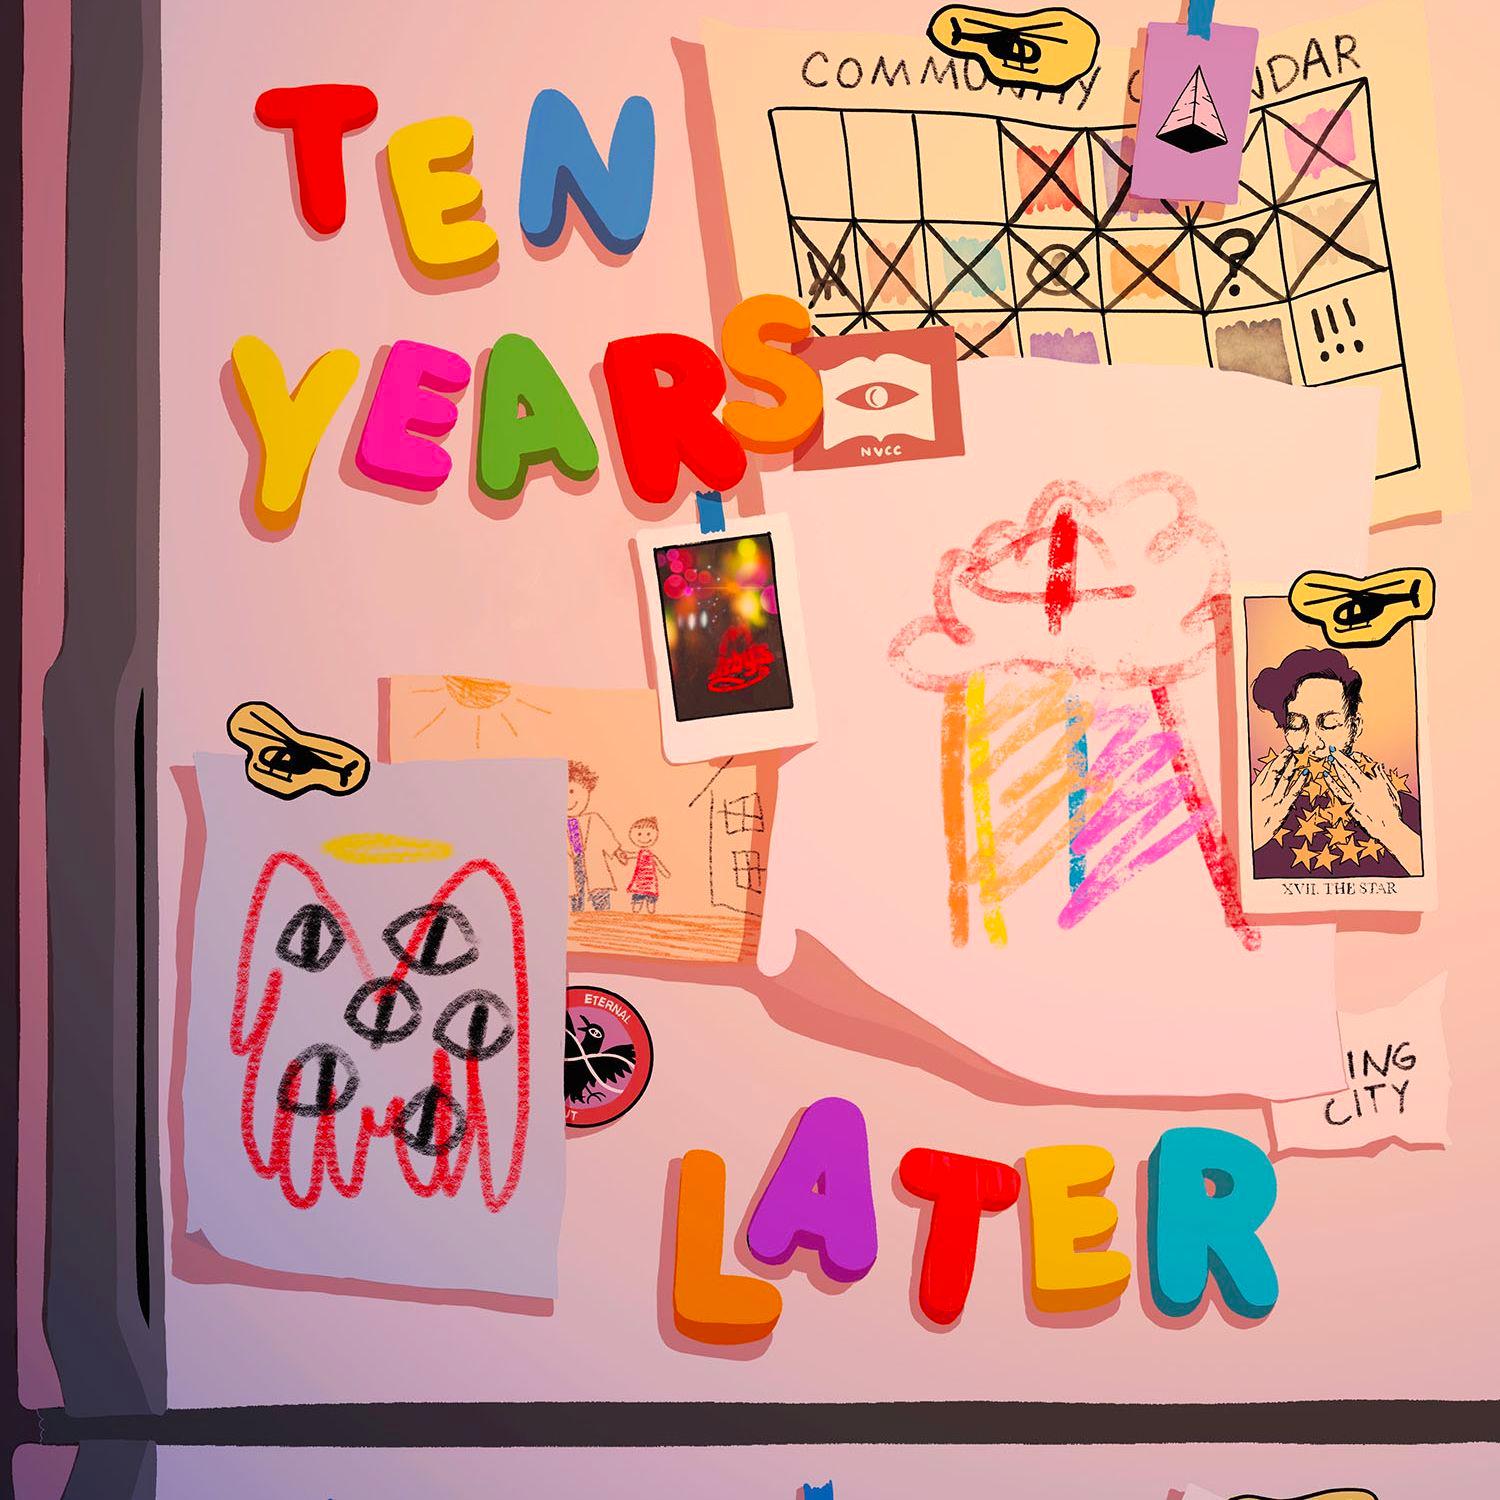 Thumbnail for "210 - Ten Years Later".